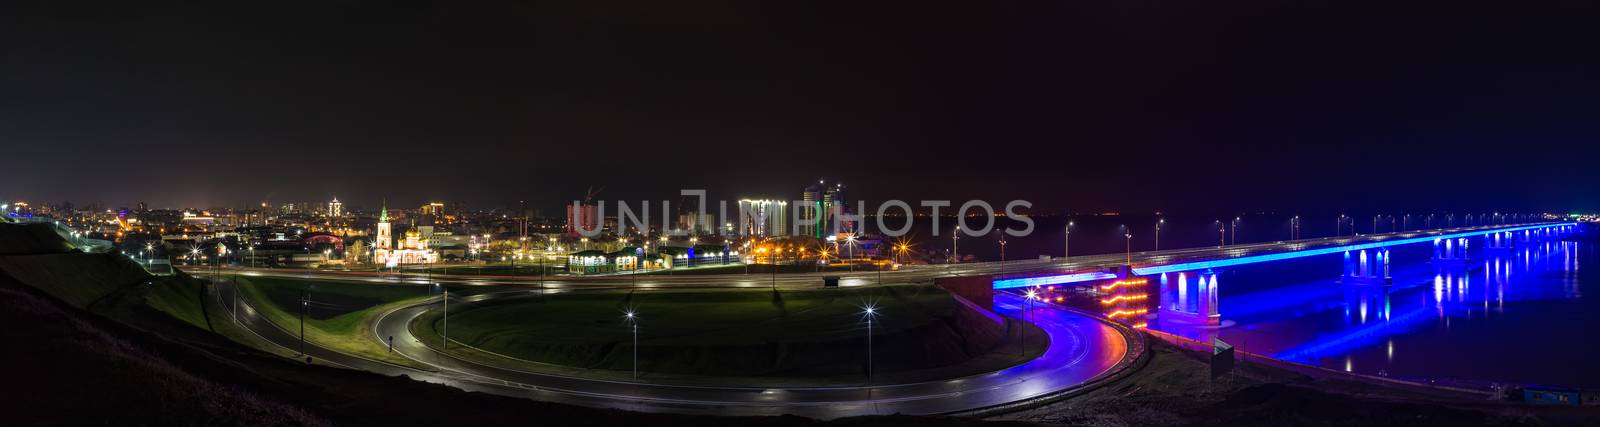 Night panorama of a bridge lit up in the darkness and Barnaul cityscape in Russia